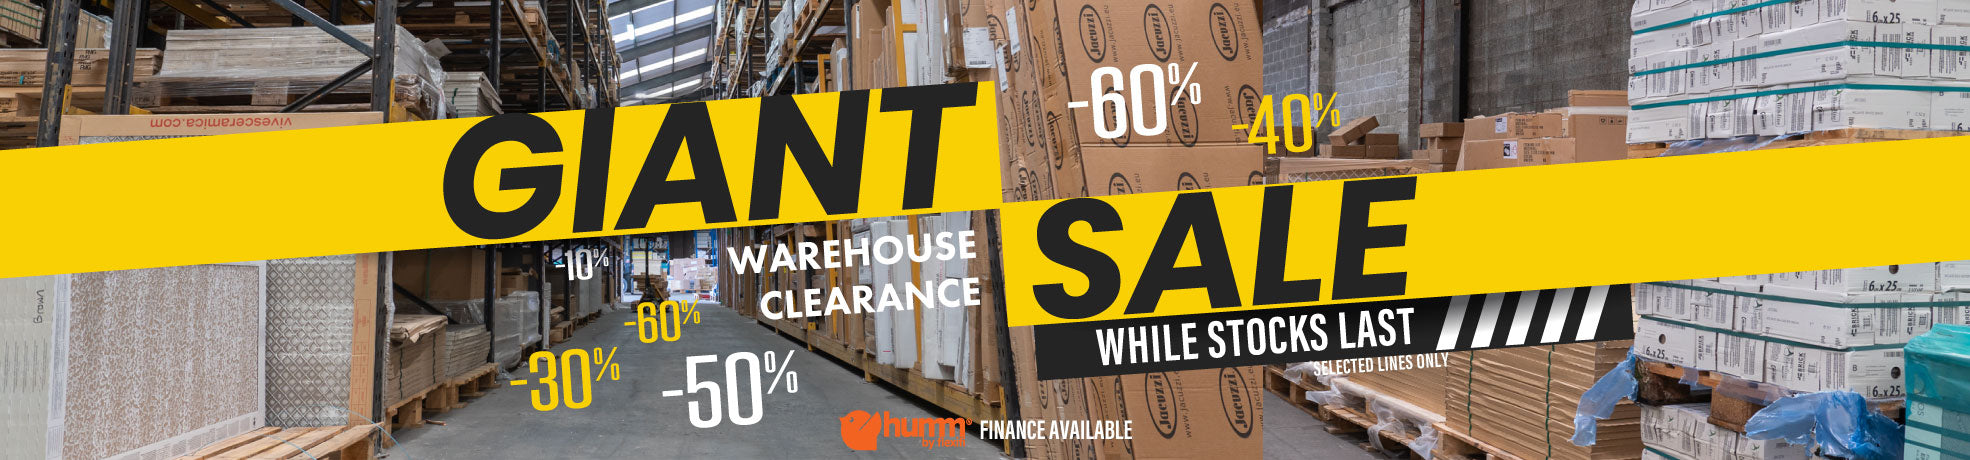 Giant End Of Year Warehouse Clearance Sale